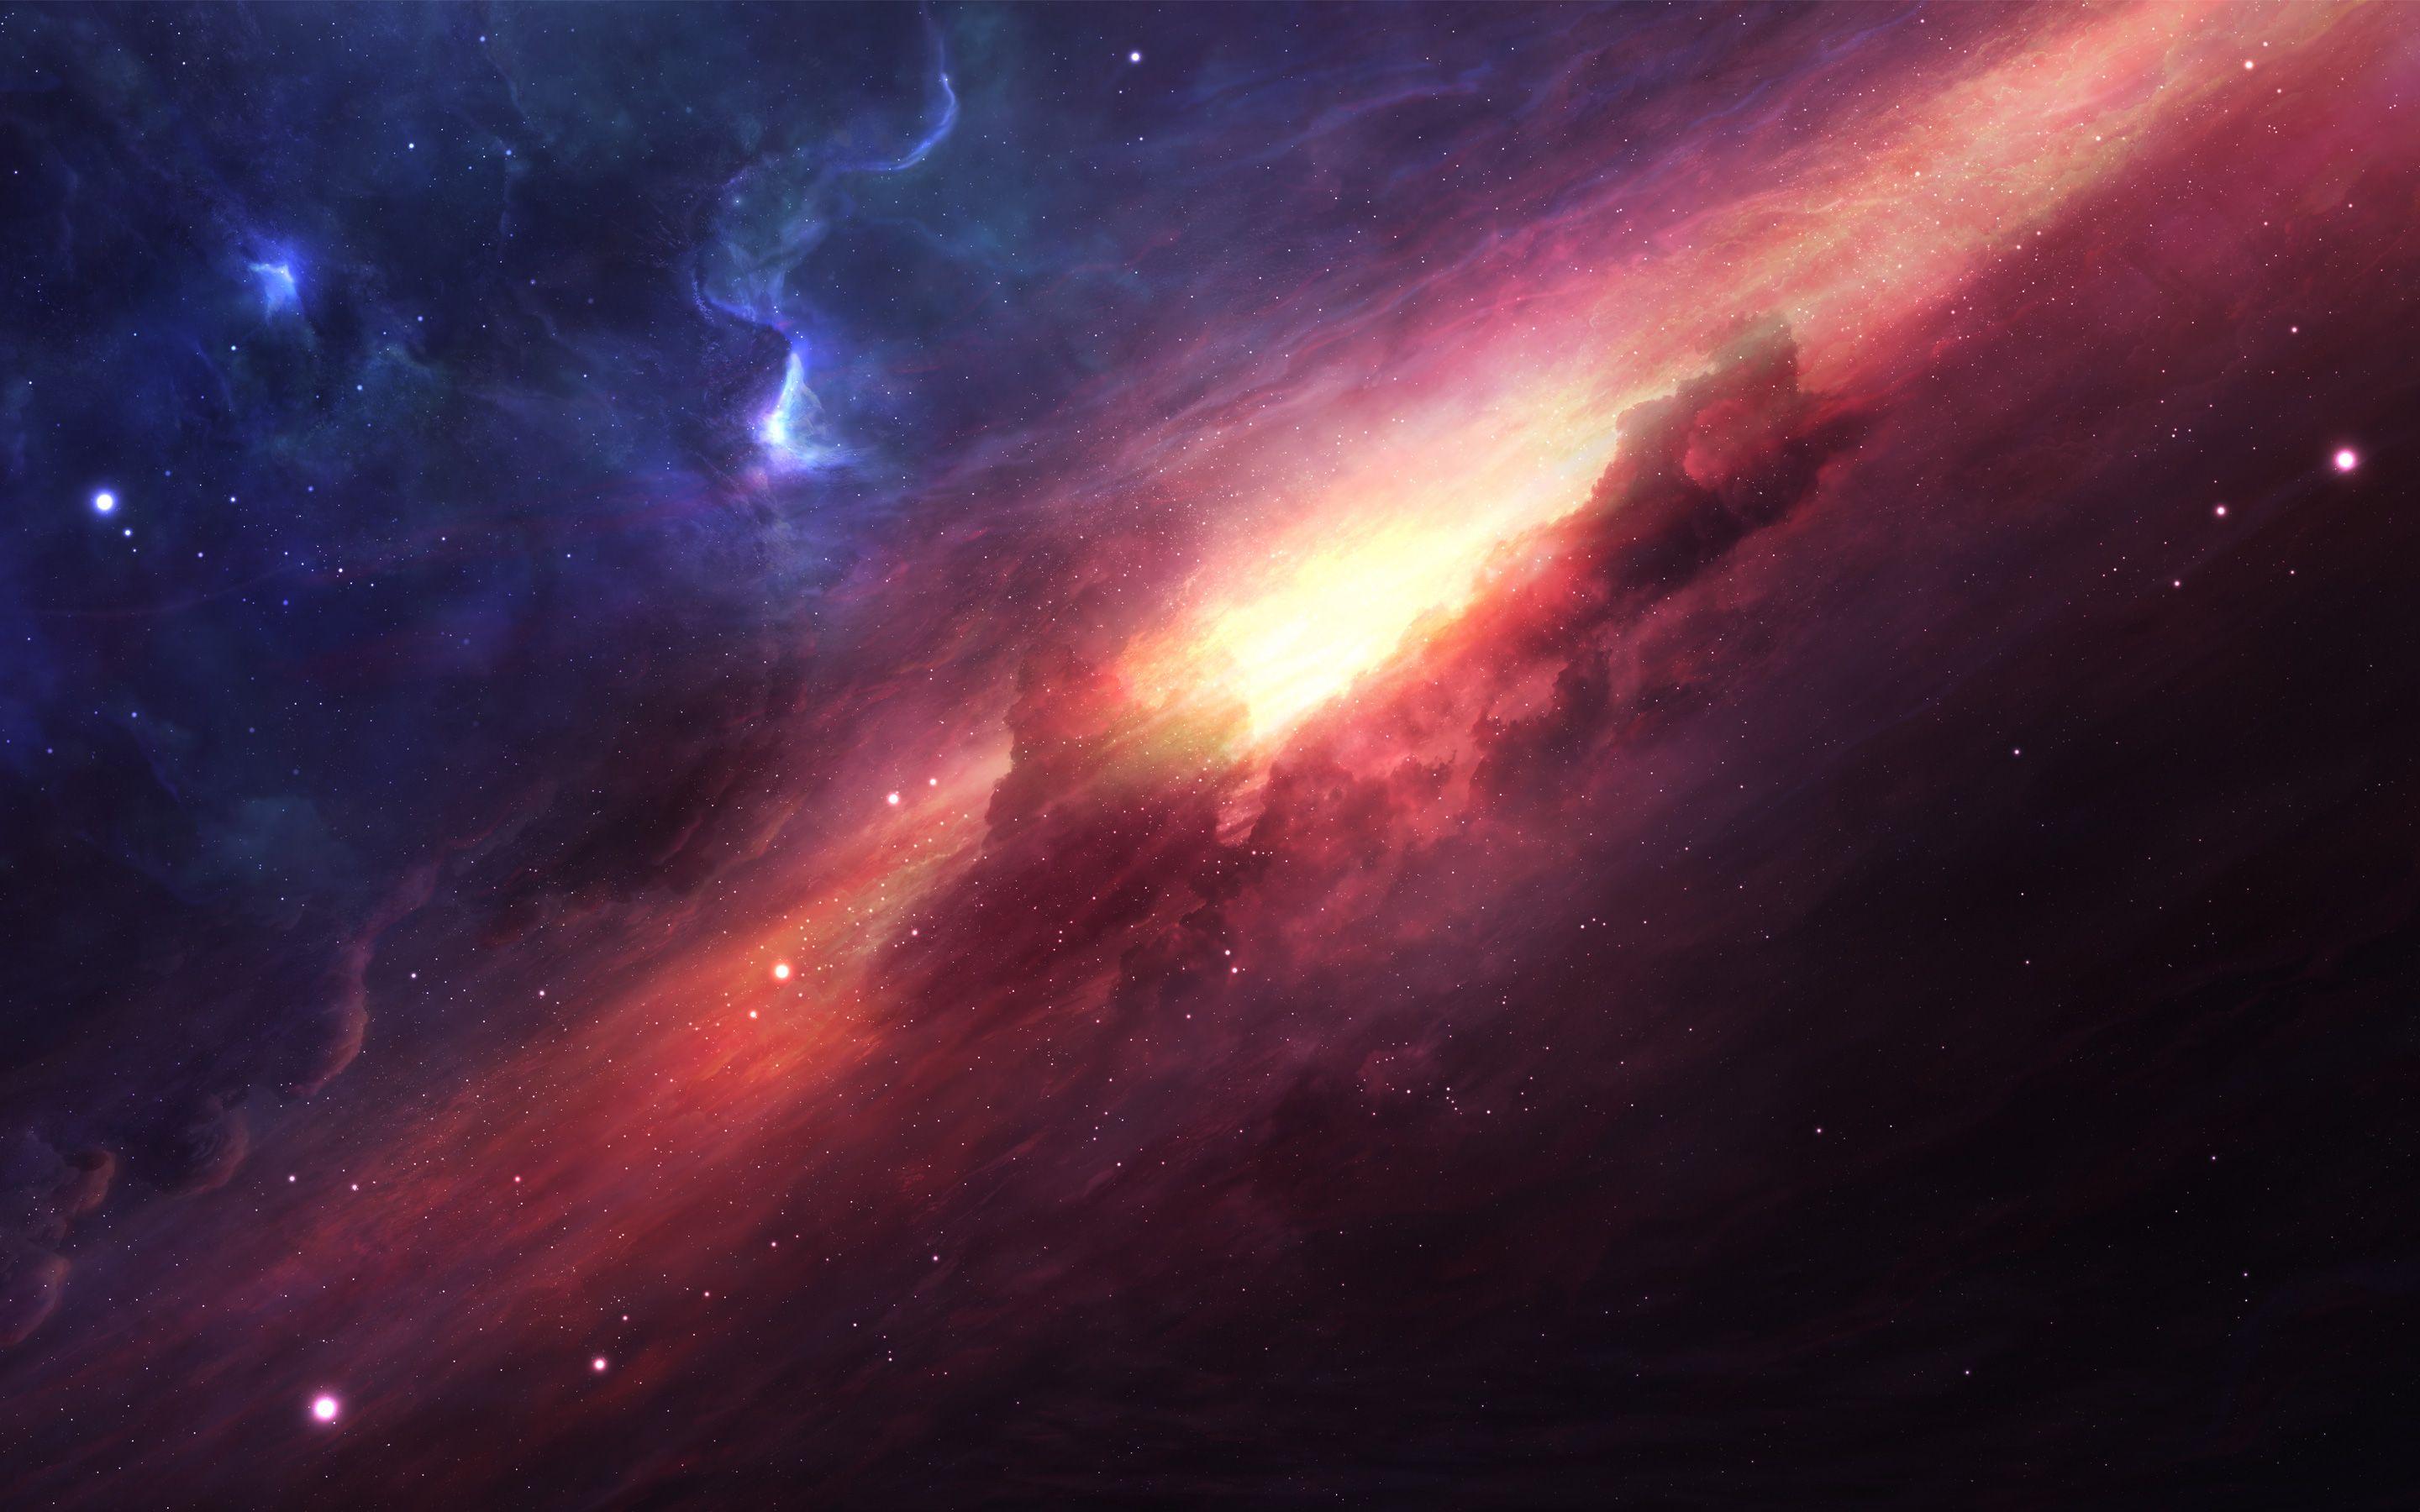 200+] 4k Space Wallpapers